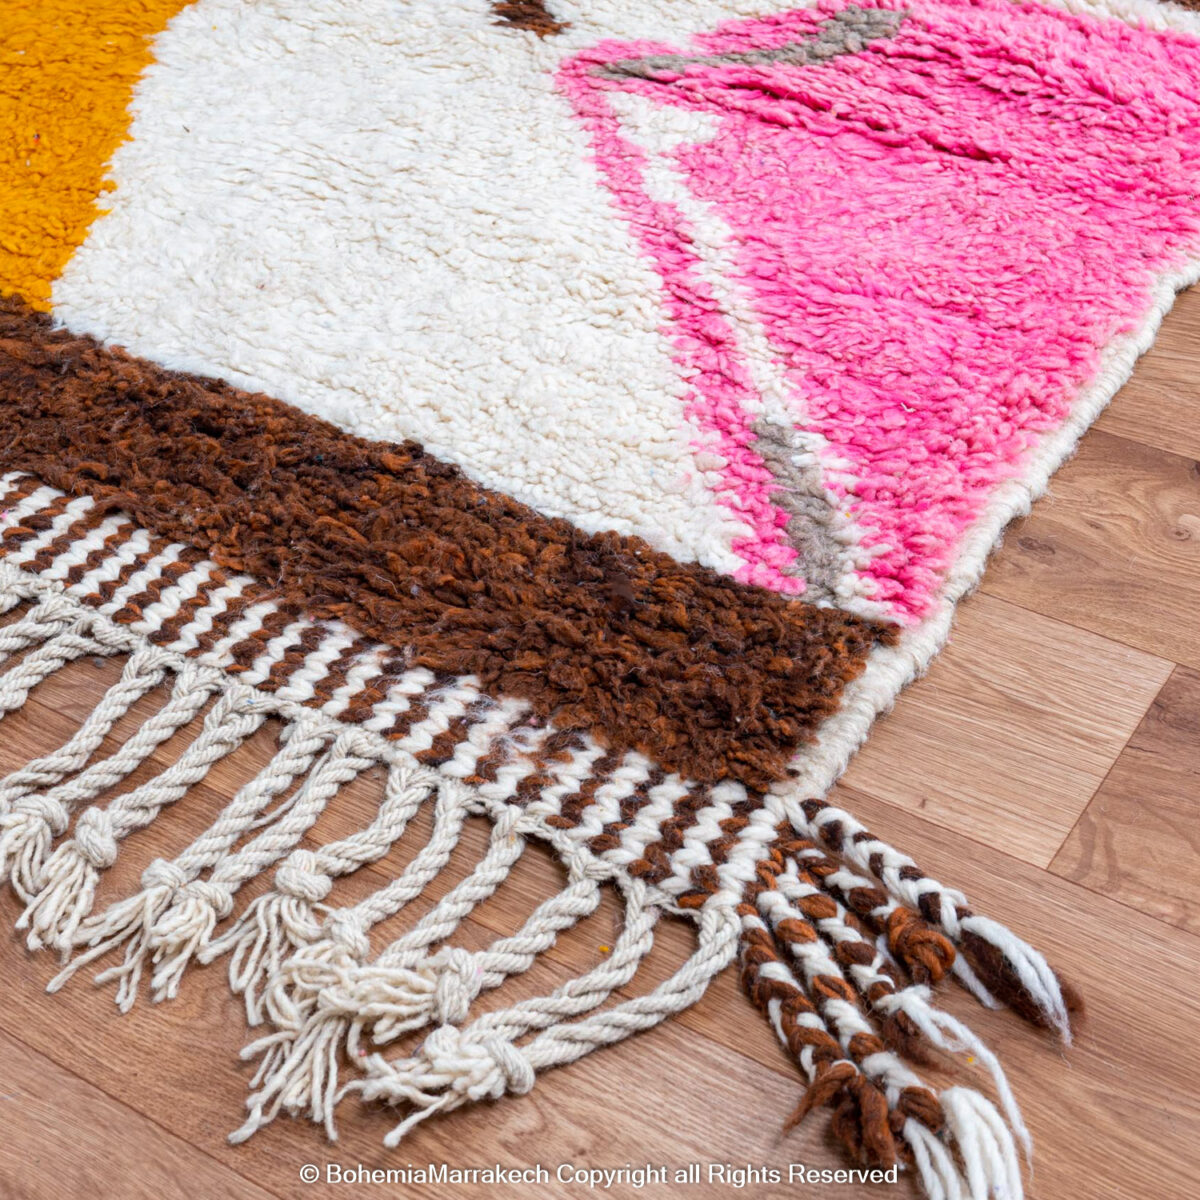 rug, carpet cleaning near me, area rugs, area carpet, outdoor rugs, washable rugs, Ruggable rugs, carpet stores near me, bathroom rugs, bath rugs, bath rug, carpet dealers near me, carpet place near me, rug cleaning near me, area rug cleaning near me, Wayfair rugs, kitchen rugs, living room rugs, jute rug, Safavieh rugs, IKEA rugs, 8x10 rug, tumble rugs, stair runner, stair runner carpet, carpet tile, Loloi rug, stair runner rugs, 8x10 carpet, IKEA carpets and rugs, IKEA carpet rug, Revival rugs, cowhide rug, runner rugs, carpet near me, rugs near me, doormat, RugsDirect, cow skin rug, Iranian rugs, round rugs, custom rugs, 8x10 area rugs, bedroom rugs, Berber carpet, 5x7 rug, Target rugs, outdoor carpets, carpet Lowes, carpet size.